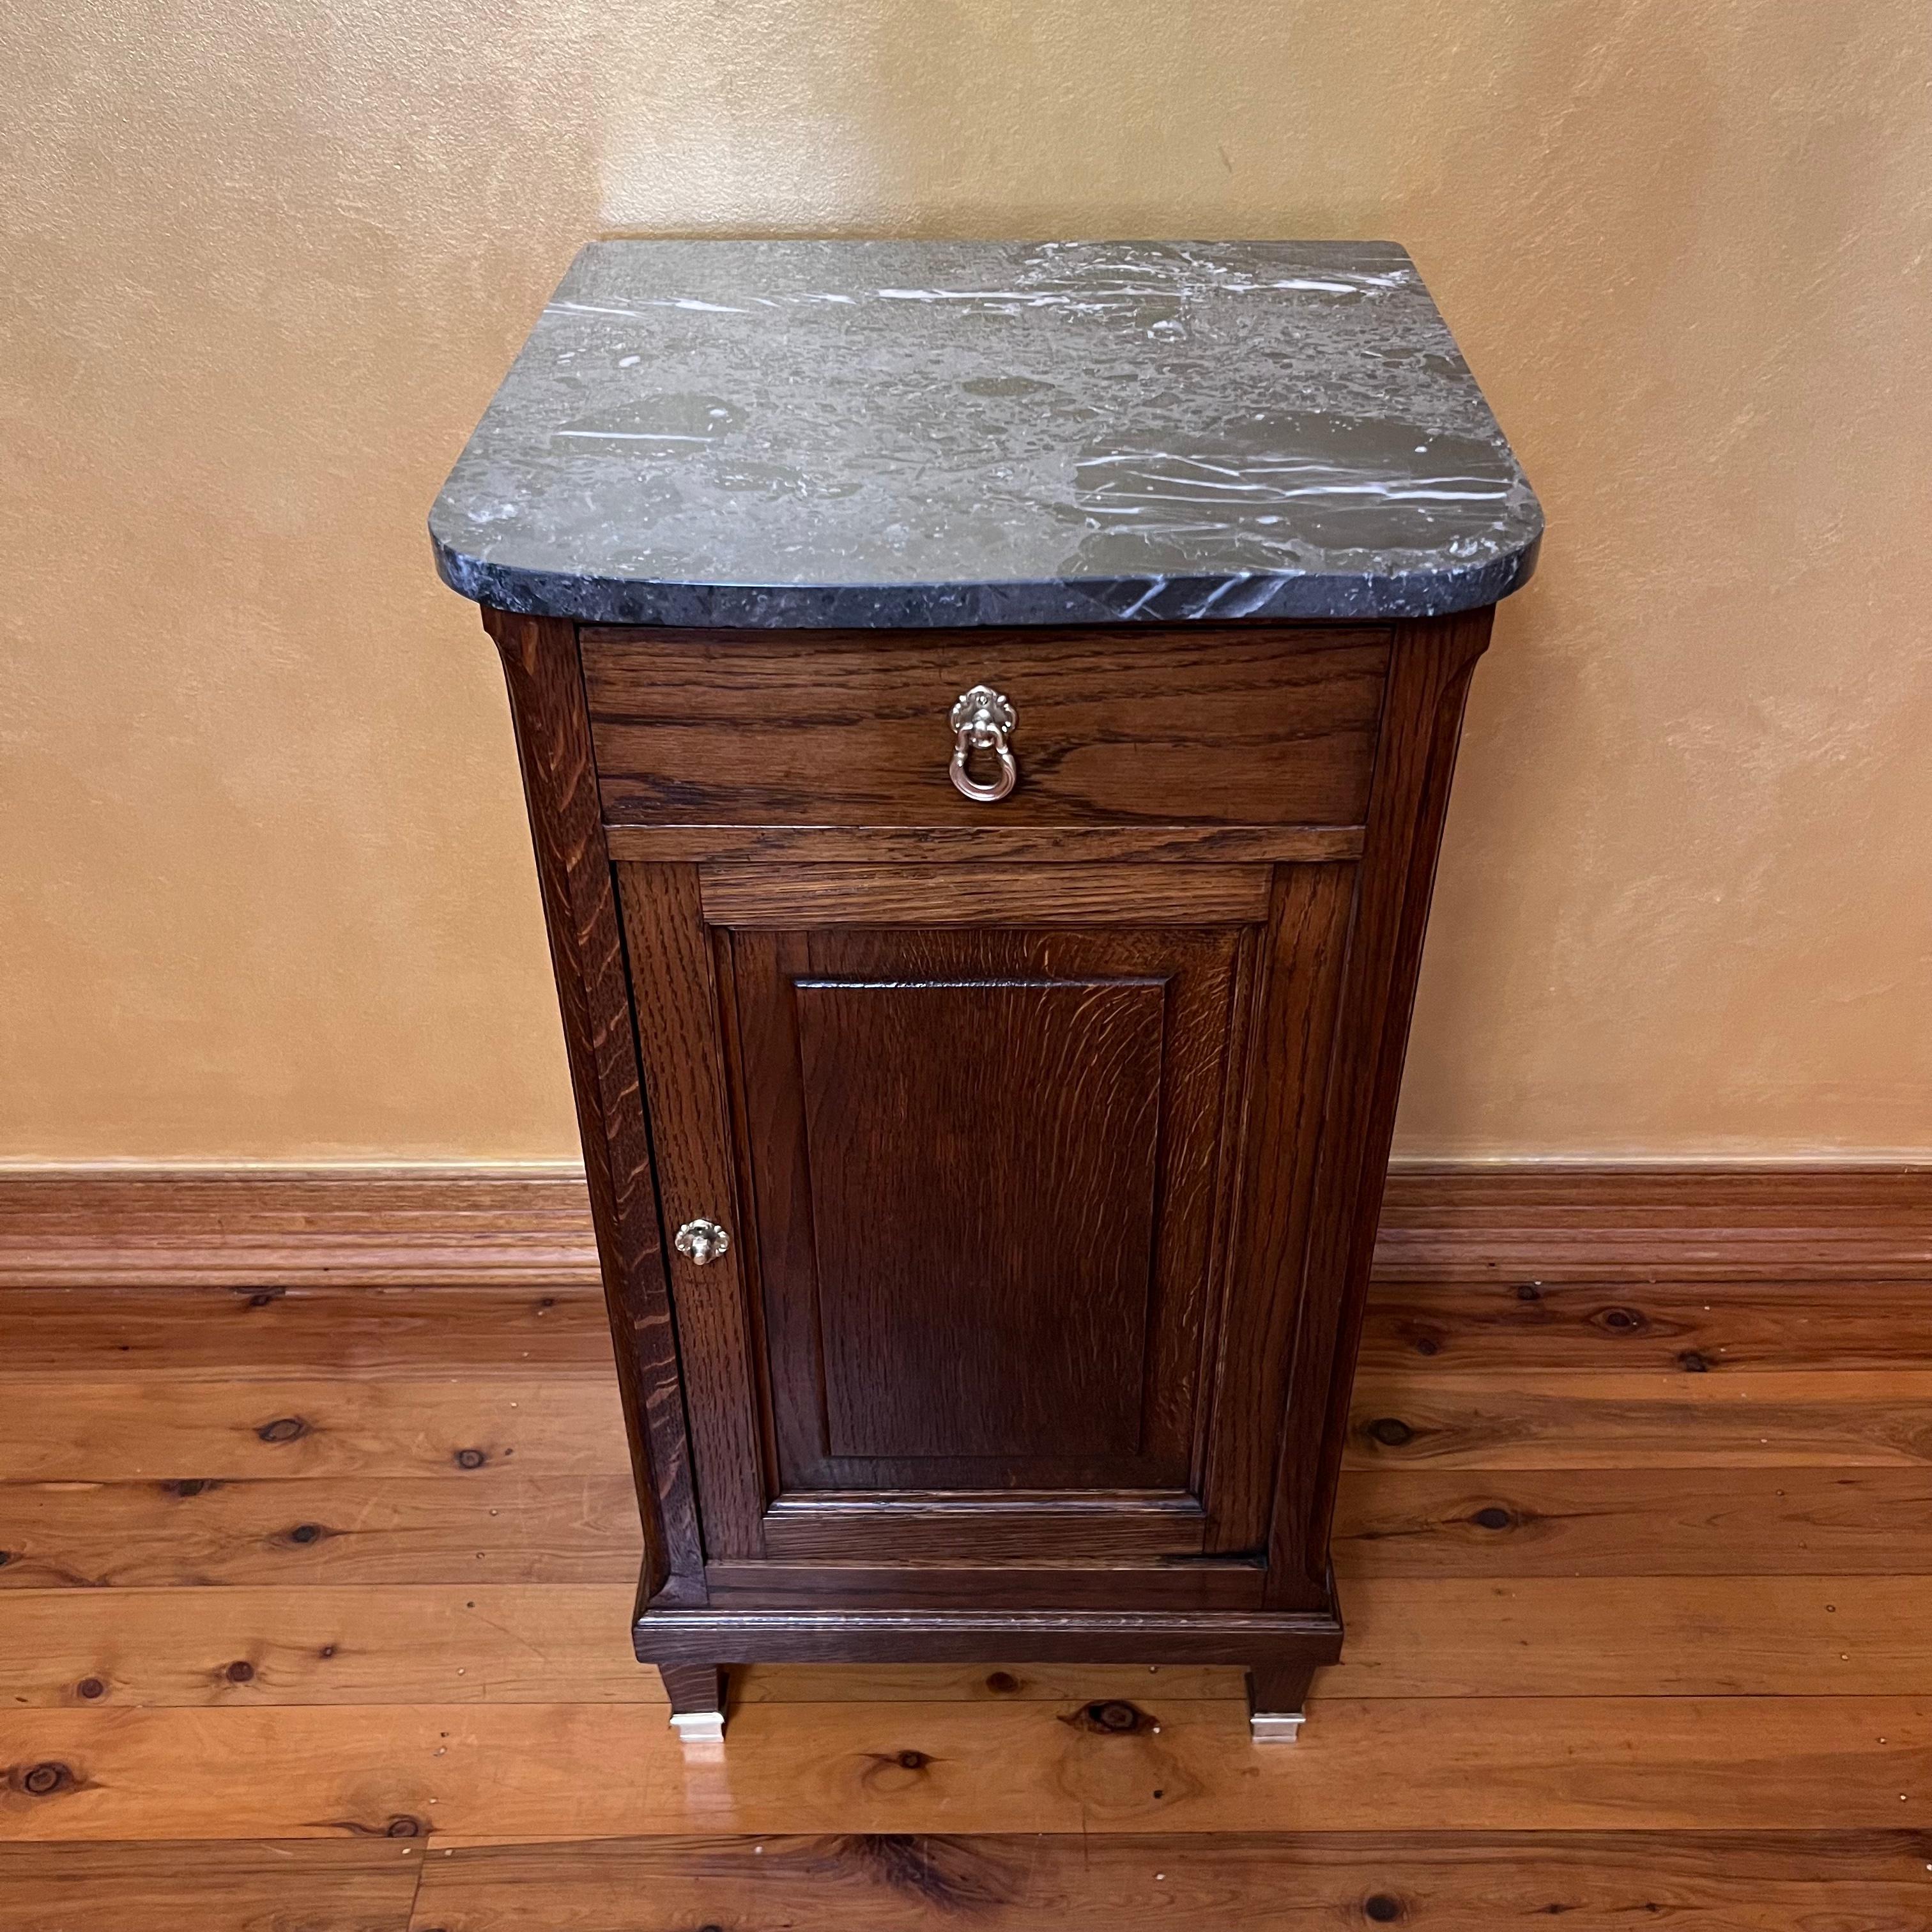 Grey marle marble top, has top draw bottom cupboard has two shelves inside, Brass fitting on front feet, brass fittings have been polished to original colour, has been French polished.

Circa: 19th Century  

Material: Oak

Country Of Origin: France